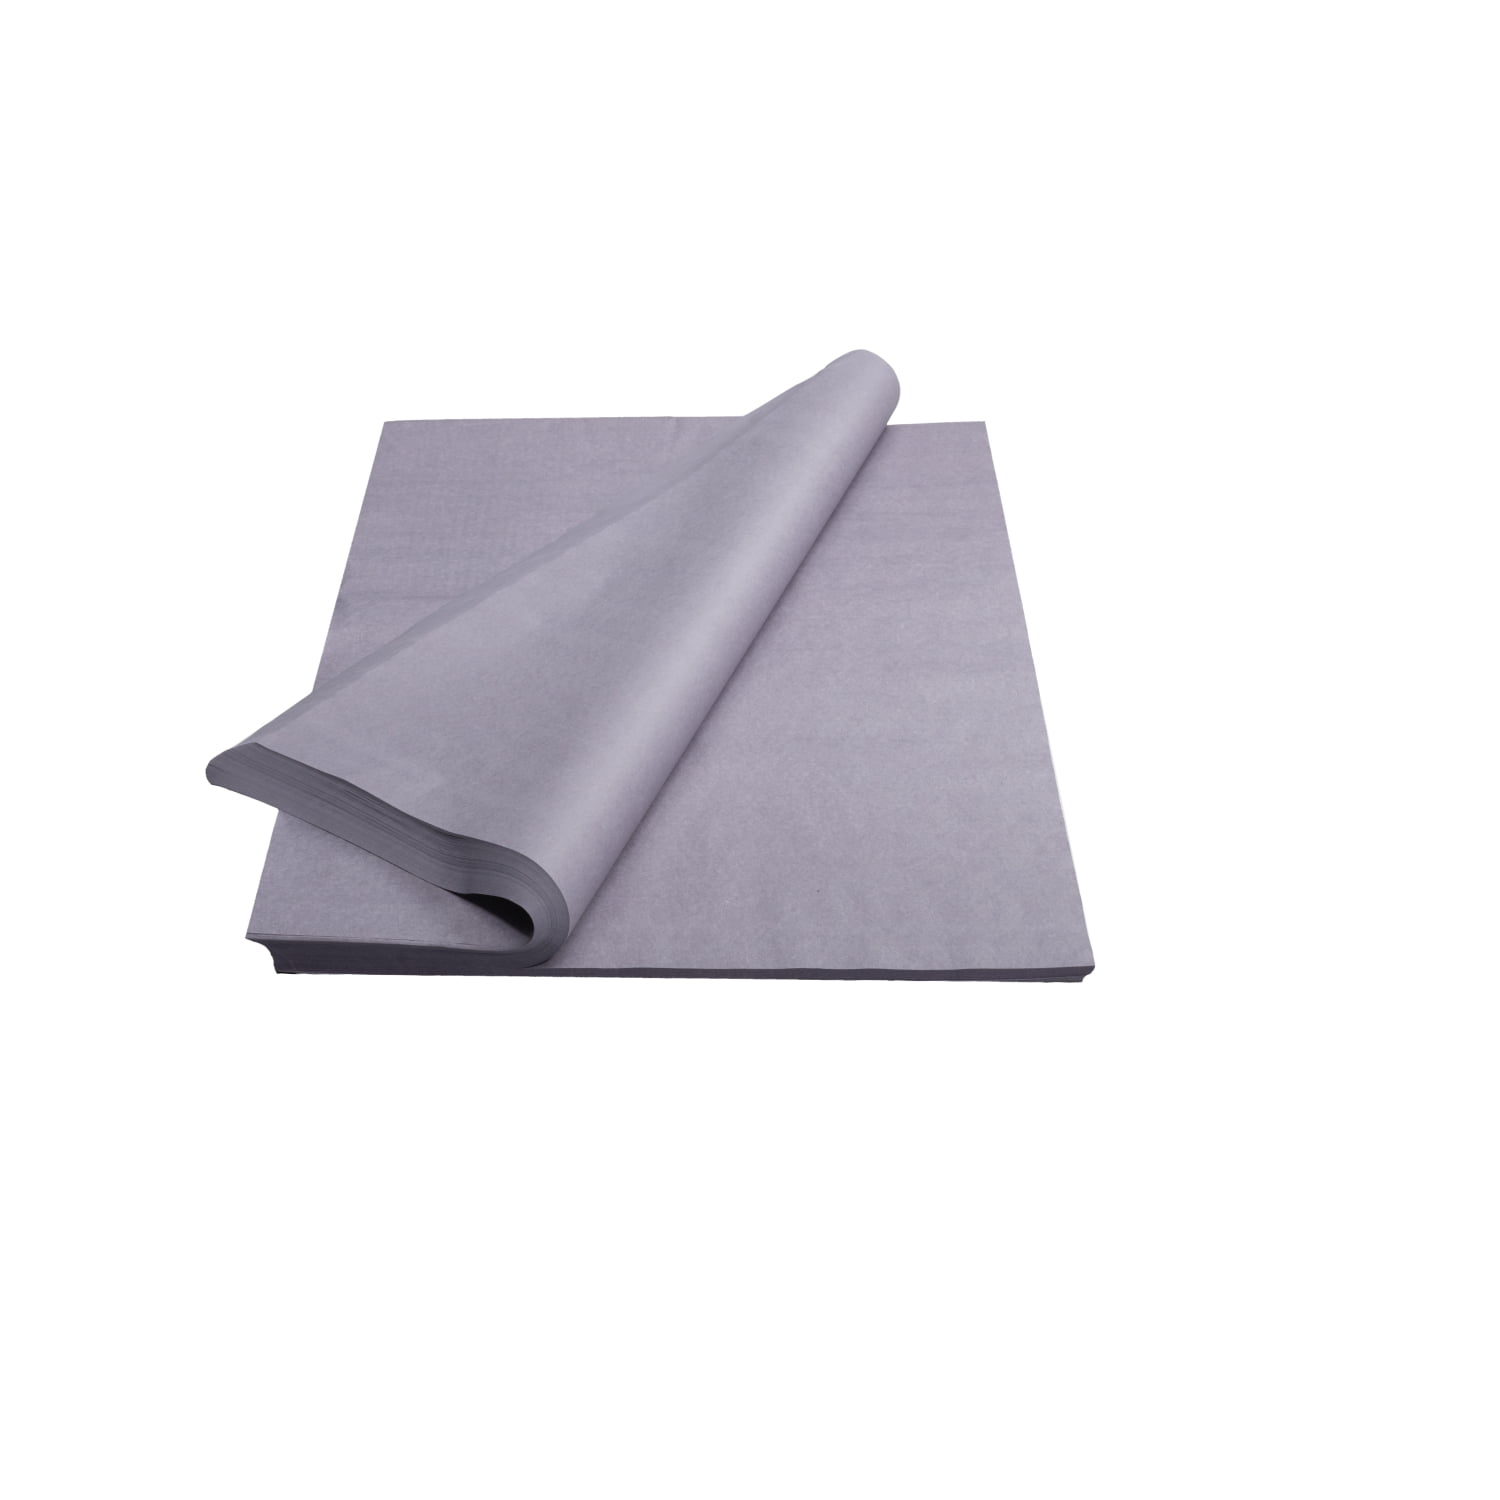 SILVER GREY Tissue Wrapping Paper 35 x 45cm 18GSM Sheets 